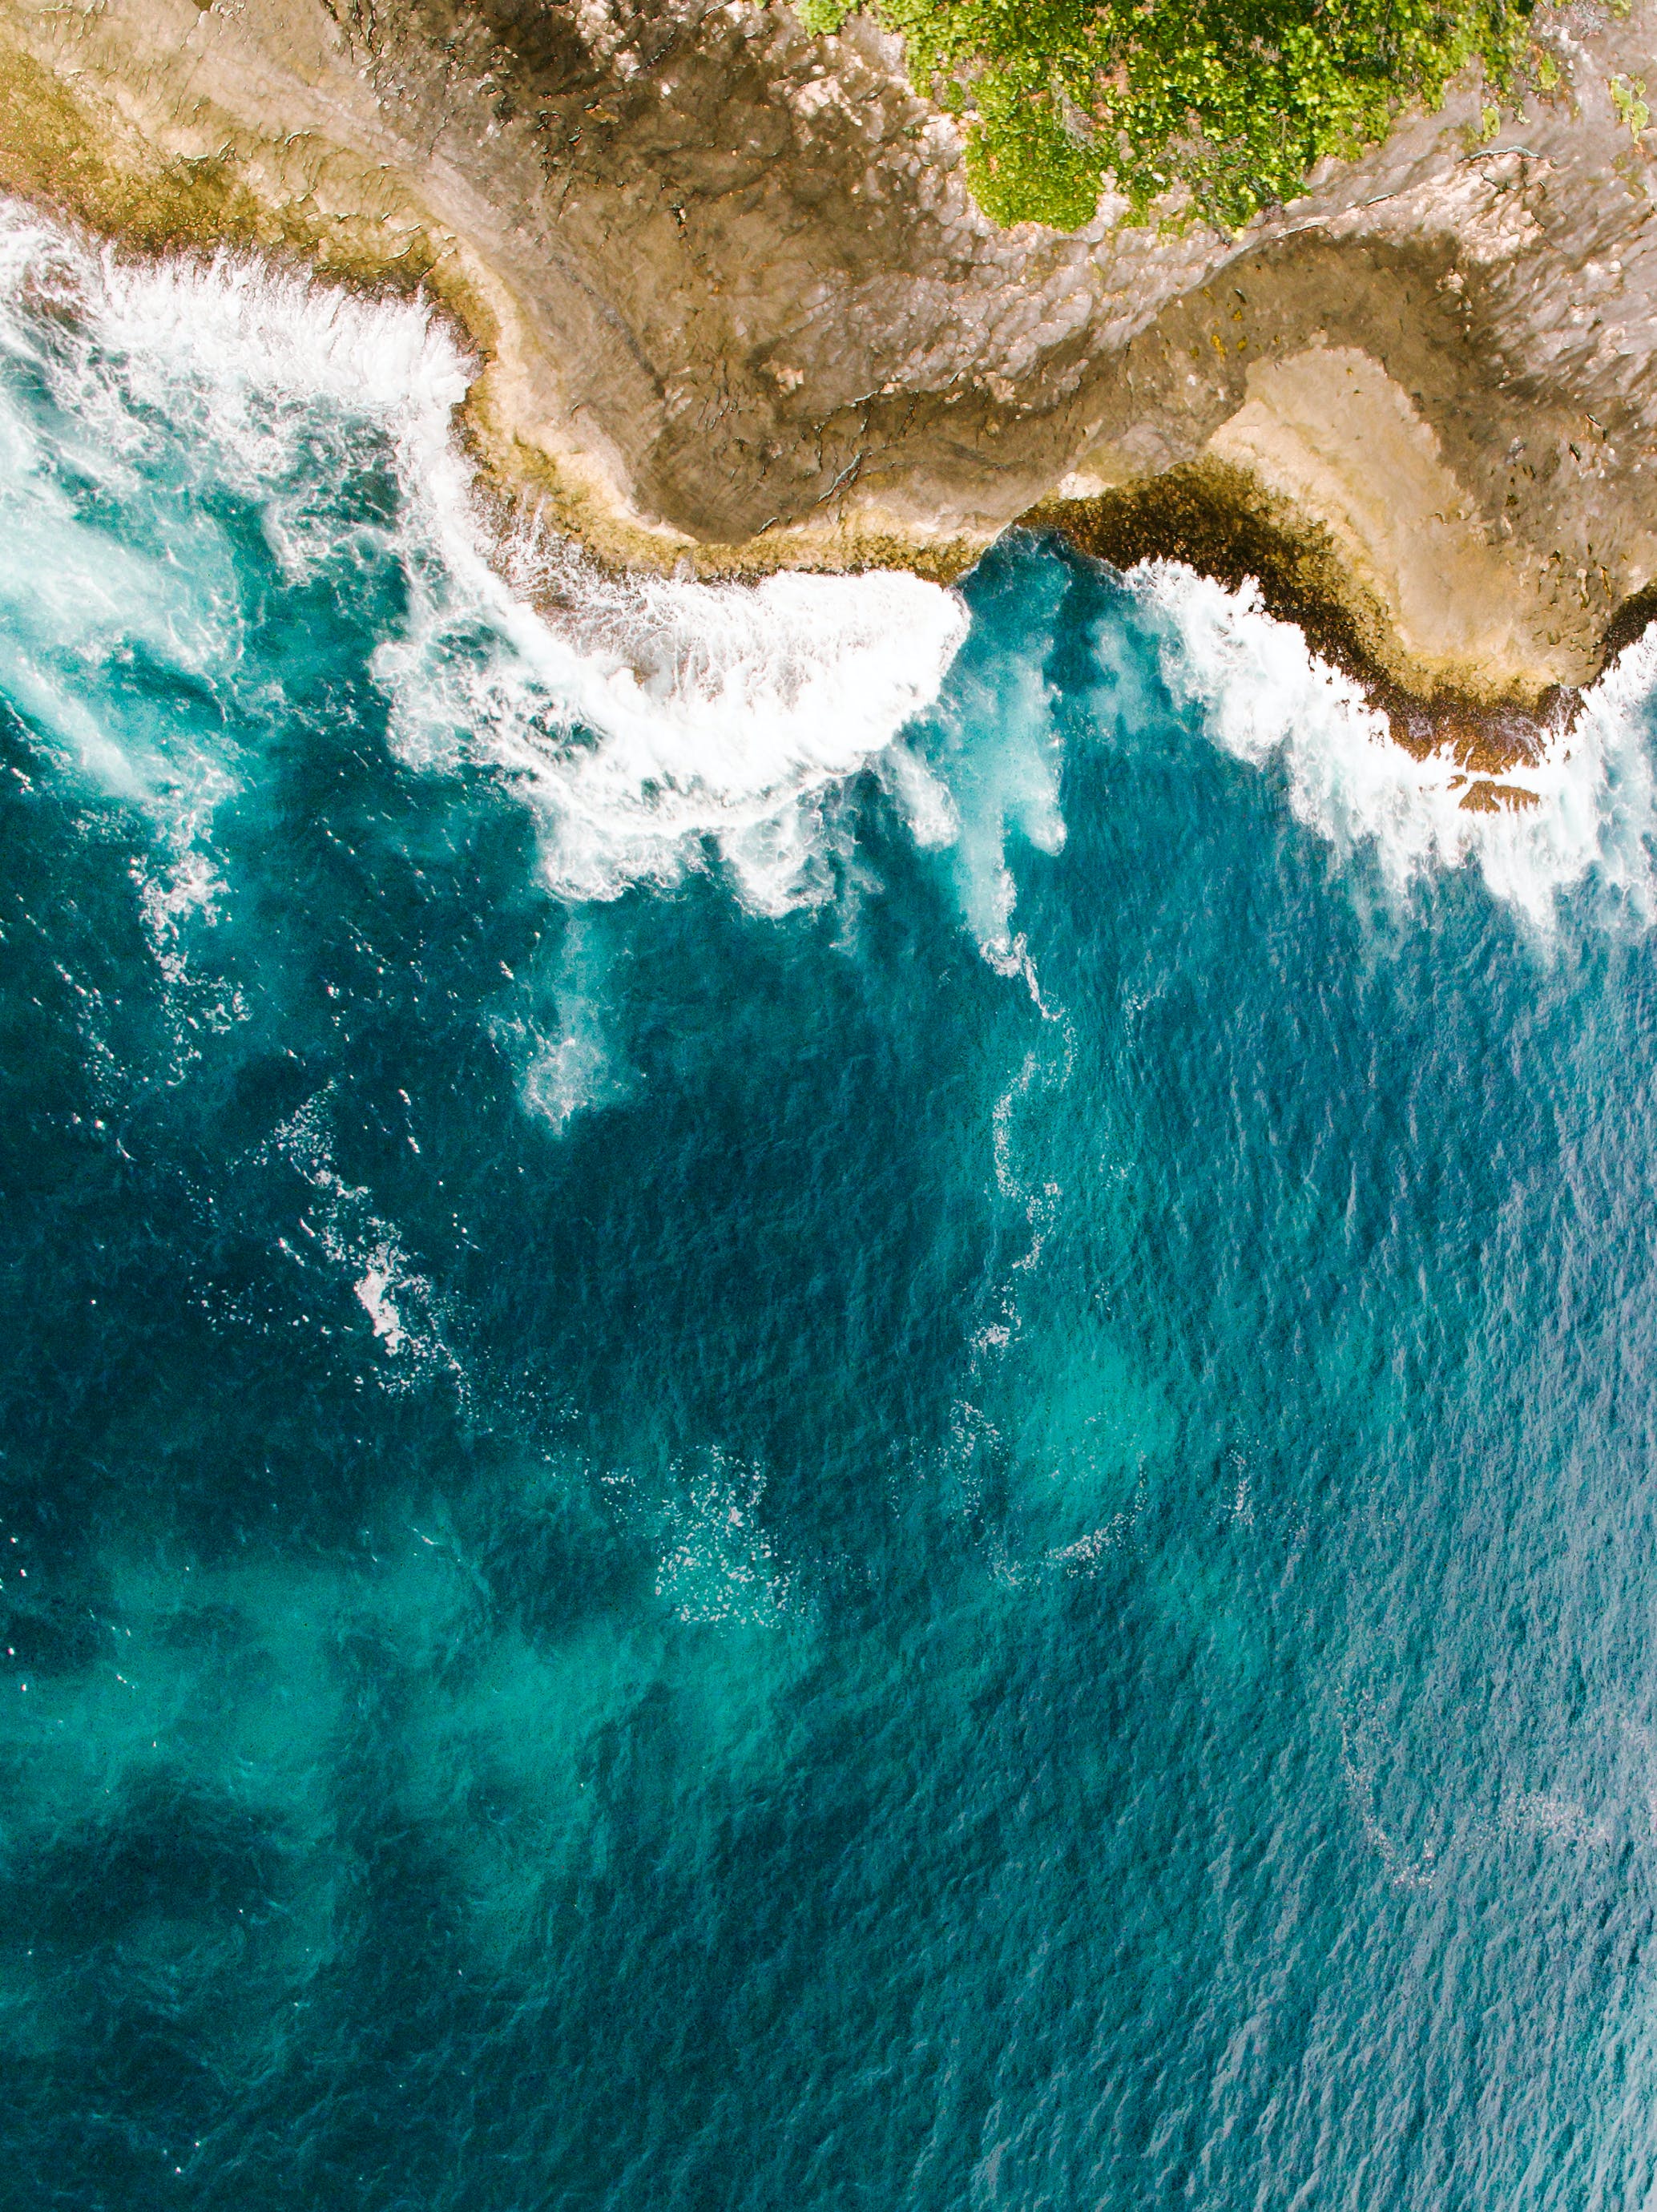 Image of a drone shot of a coastal cliff area with ocean waves crashing against cliff